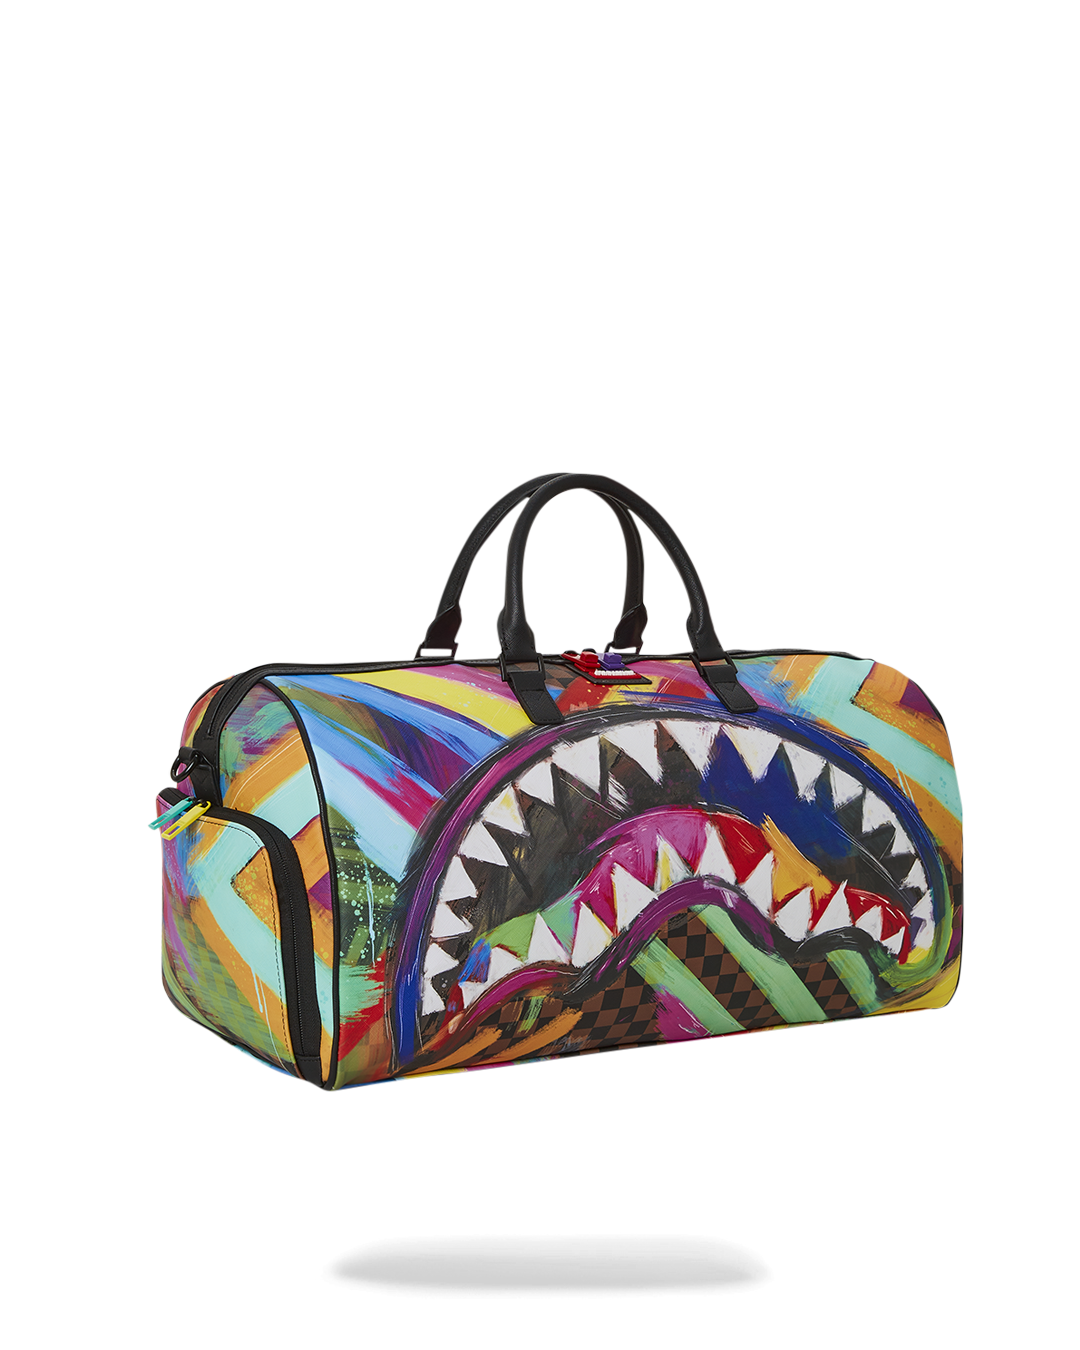 Sprayground Sharks in Paris Backpack, Duffle Bag and Crossbody bag In Store  Now 